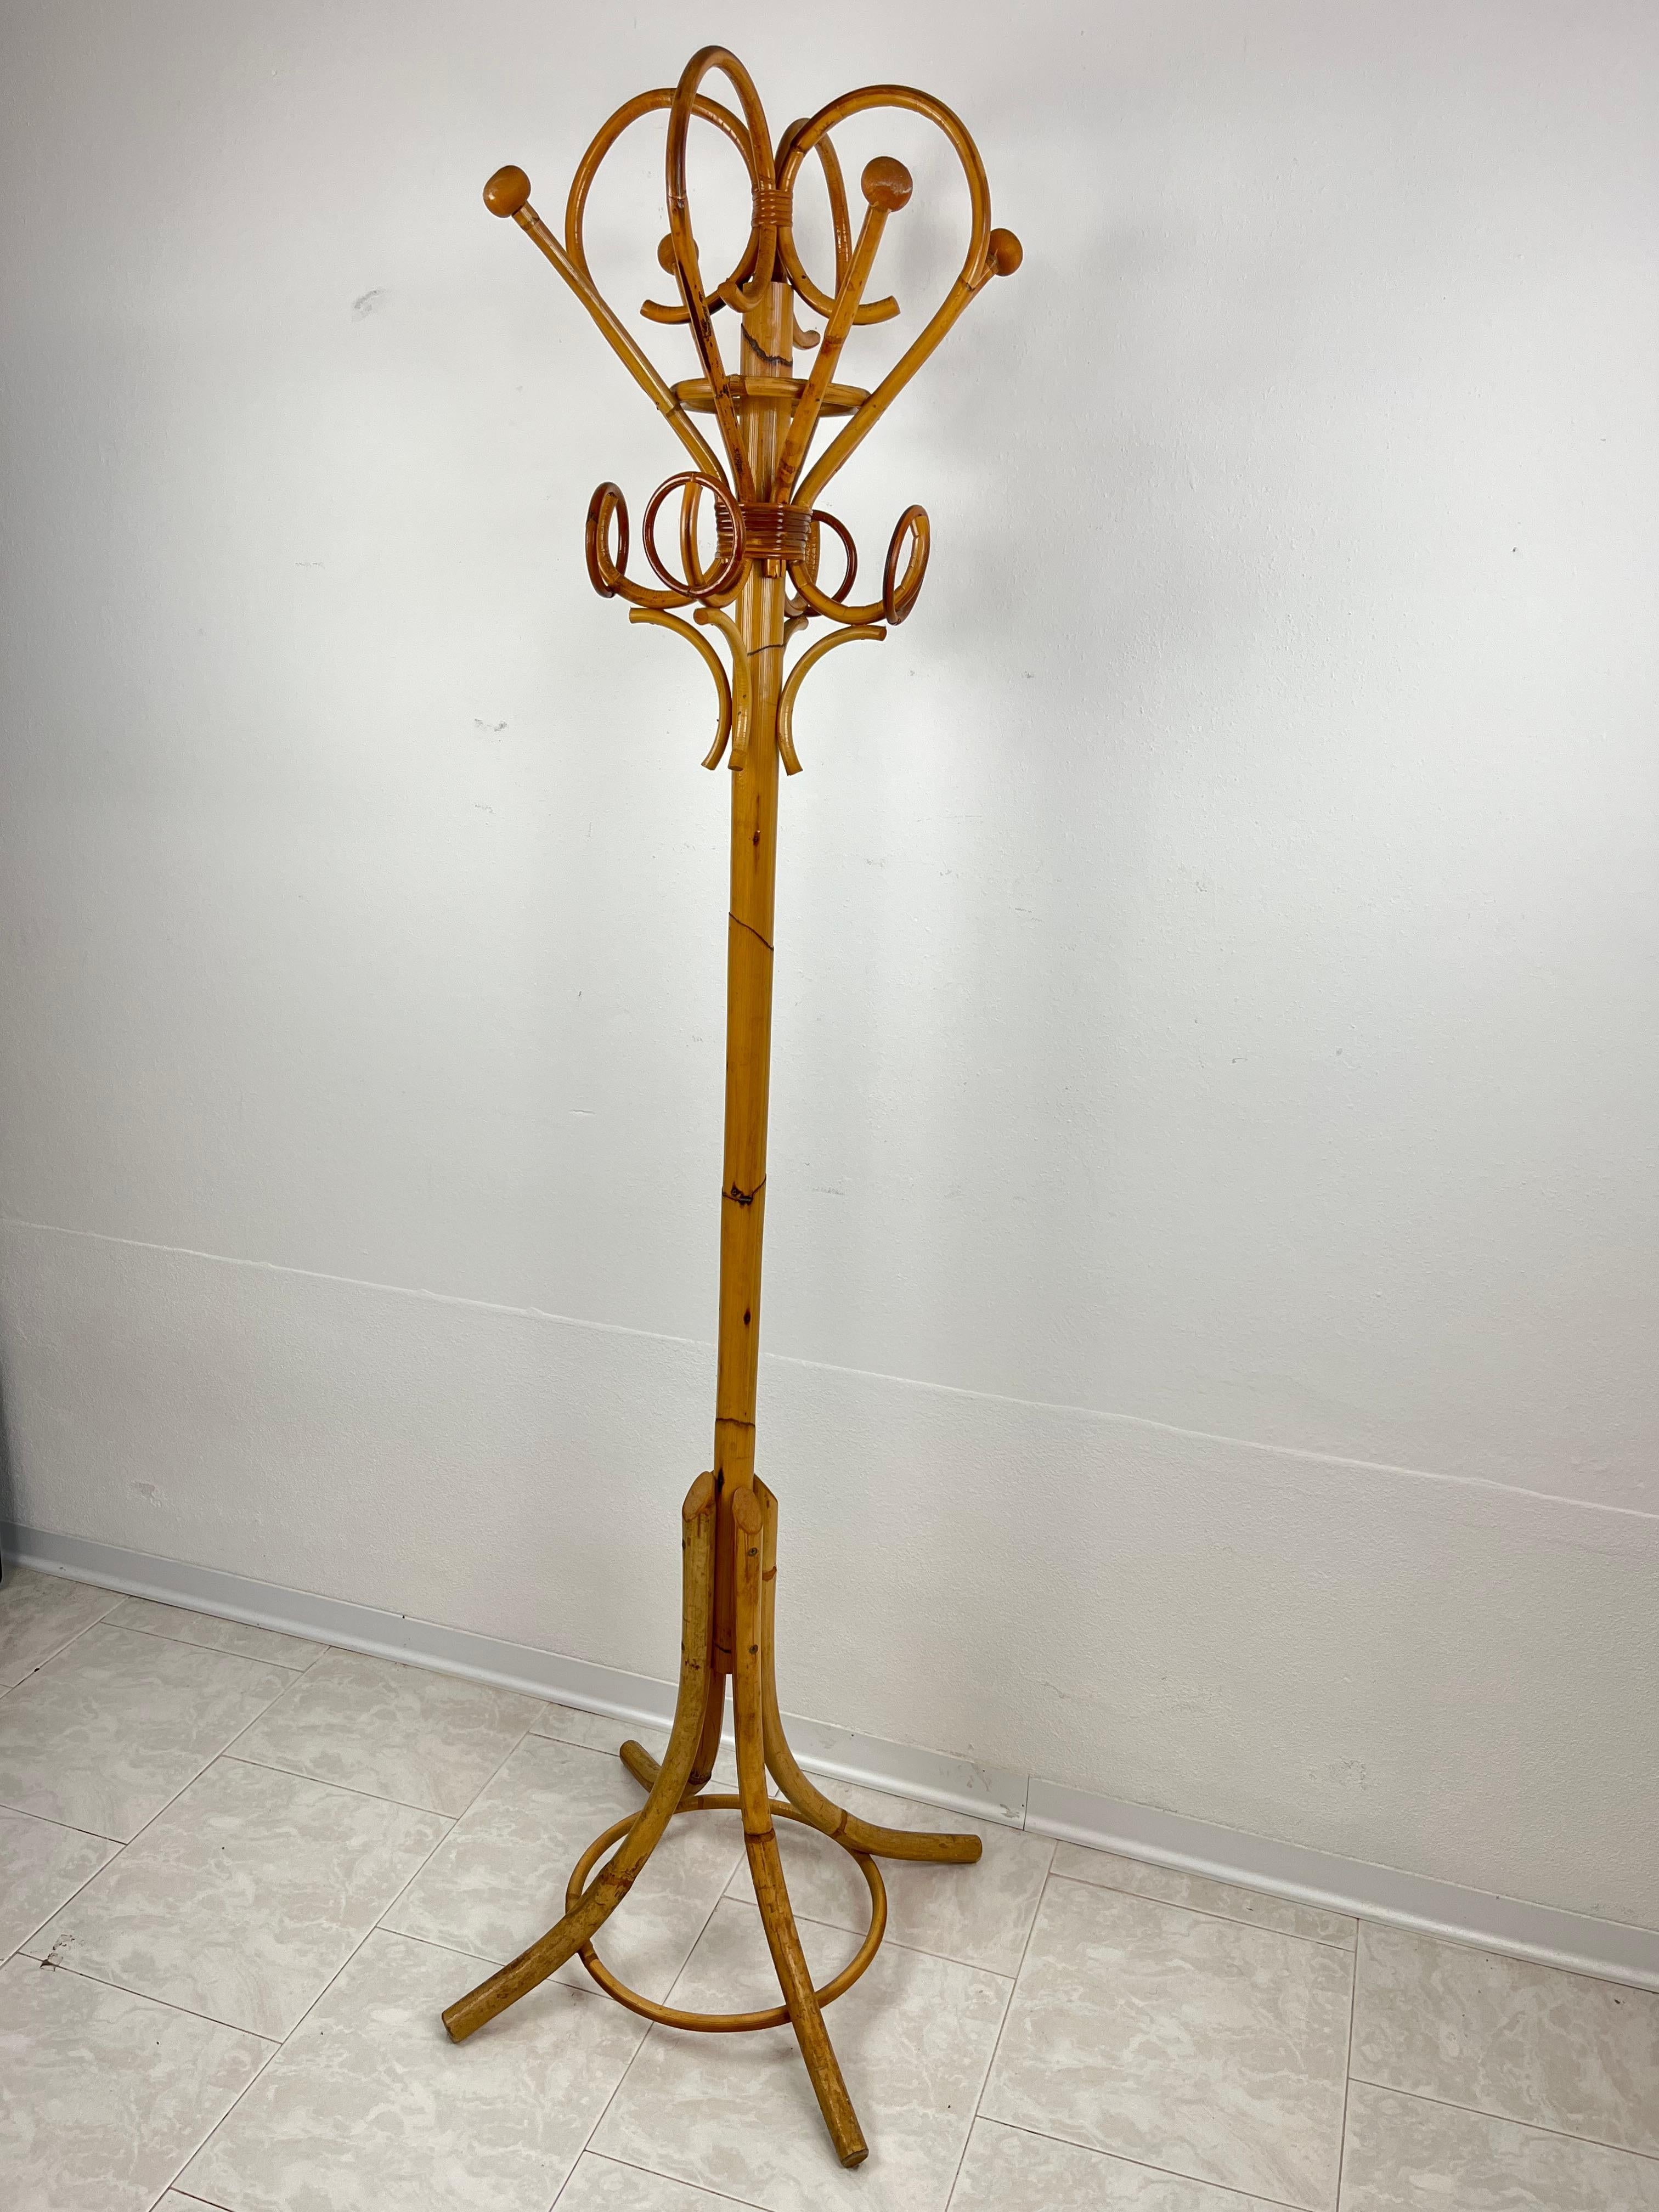 Bamboo and wicker coat rack, Italy, 1970s
Purchased by my grandparents for the holiday home, it is in excellent condition. Small signs of the time.